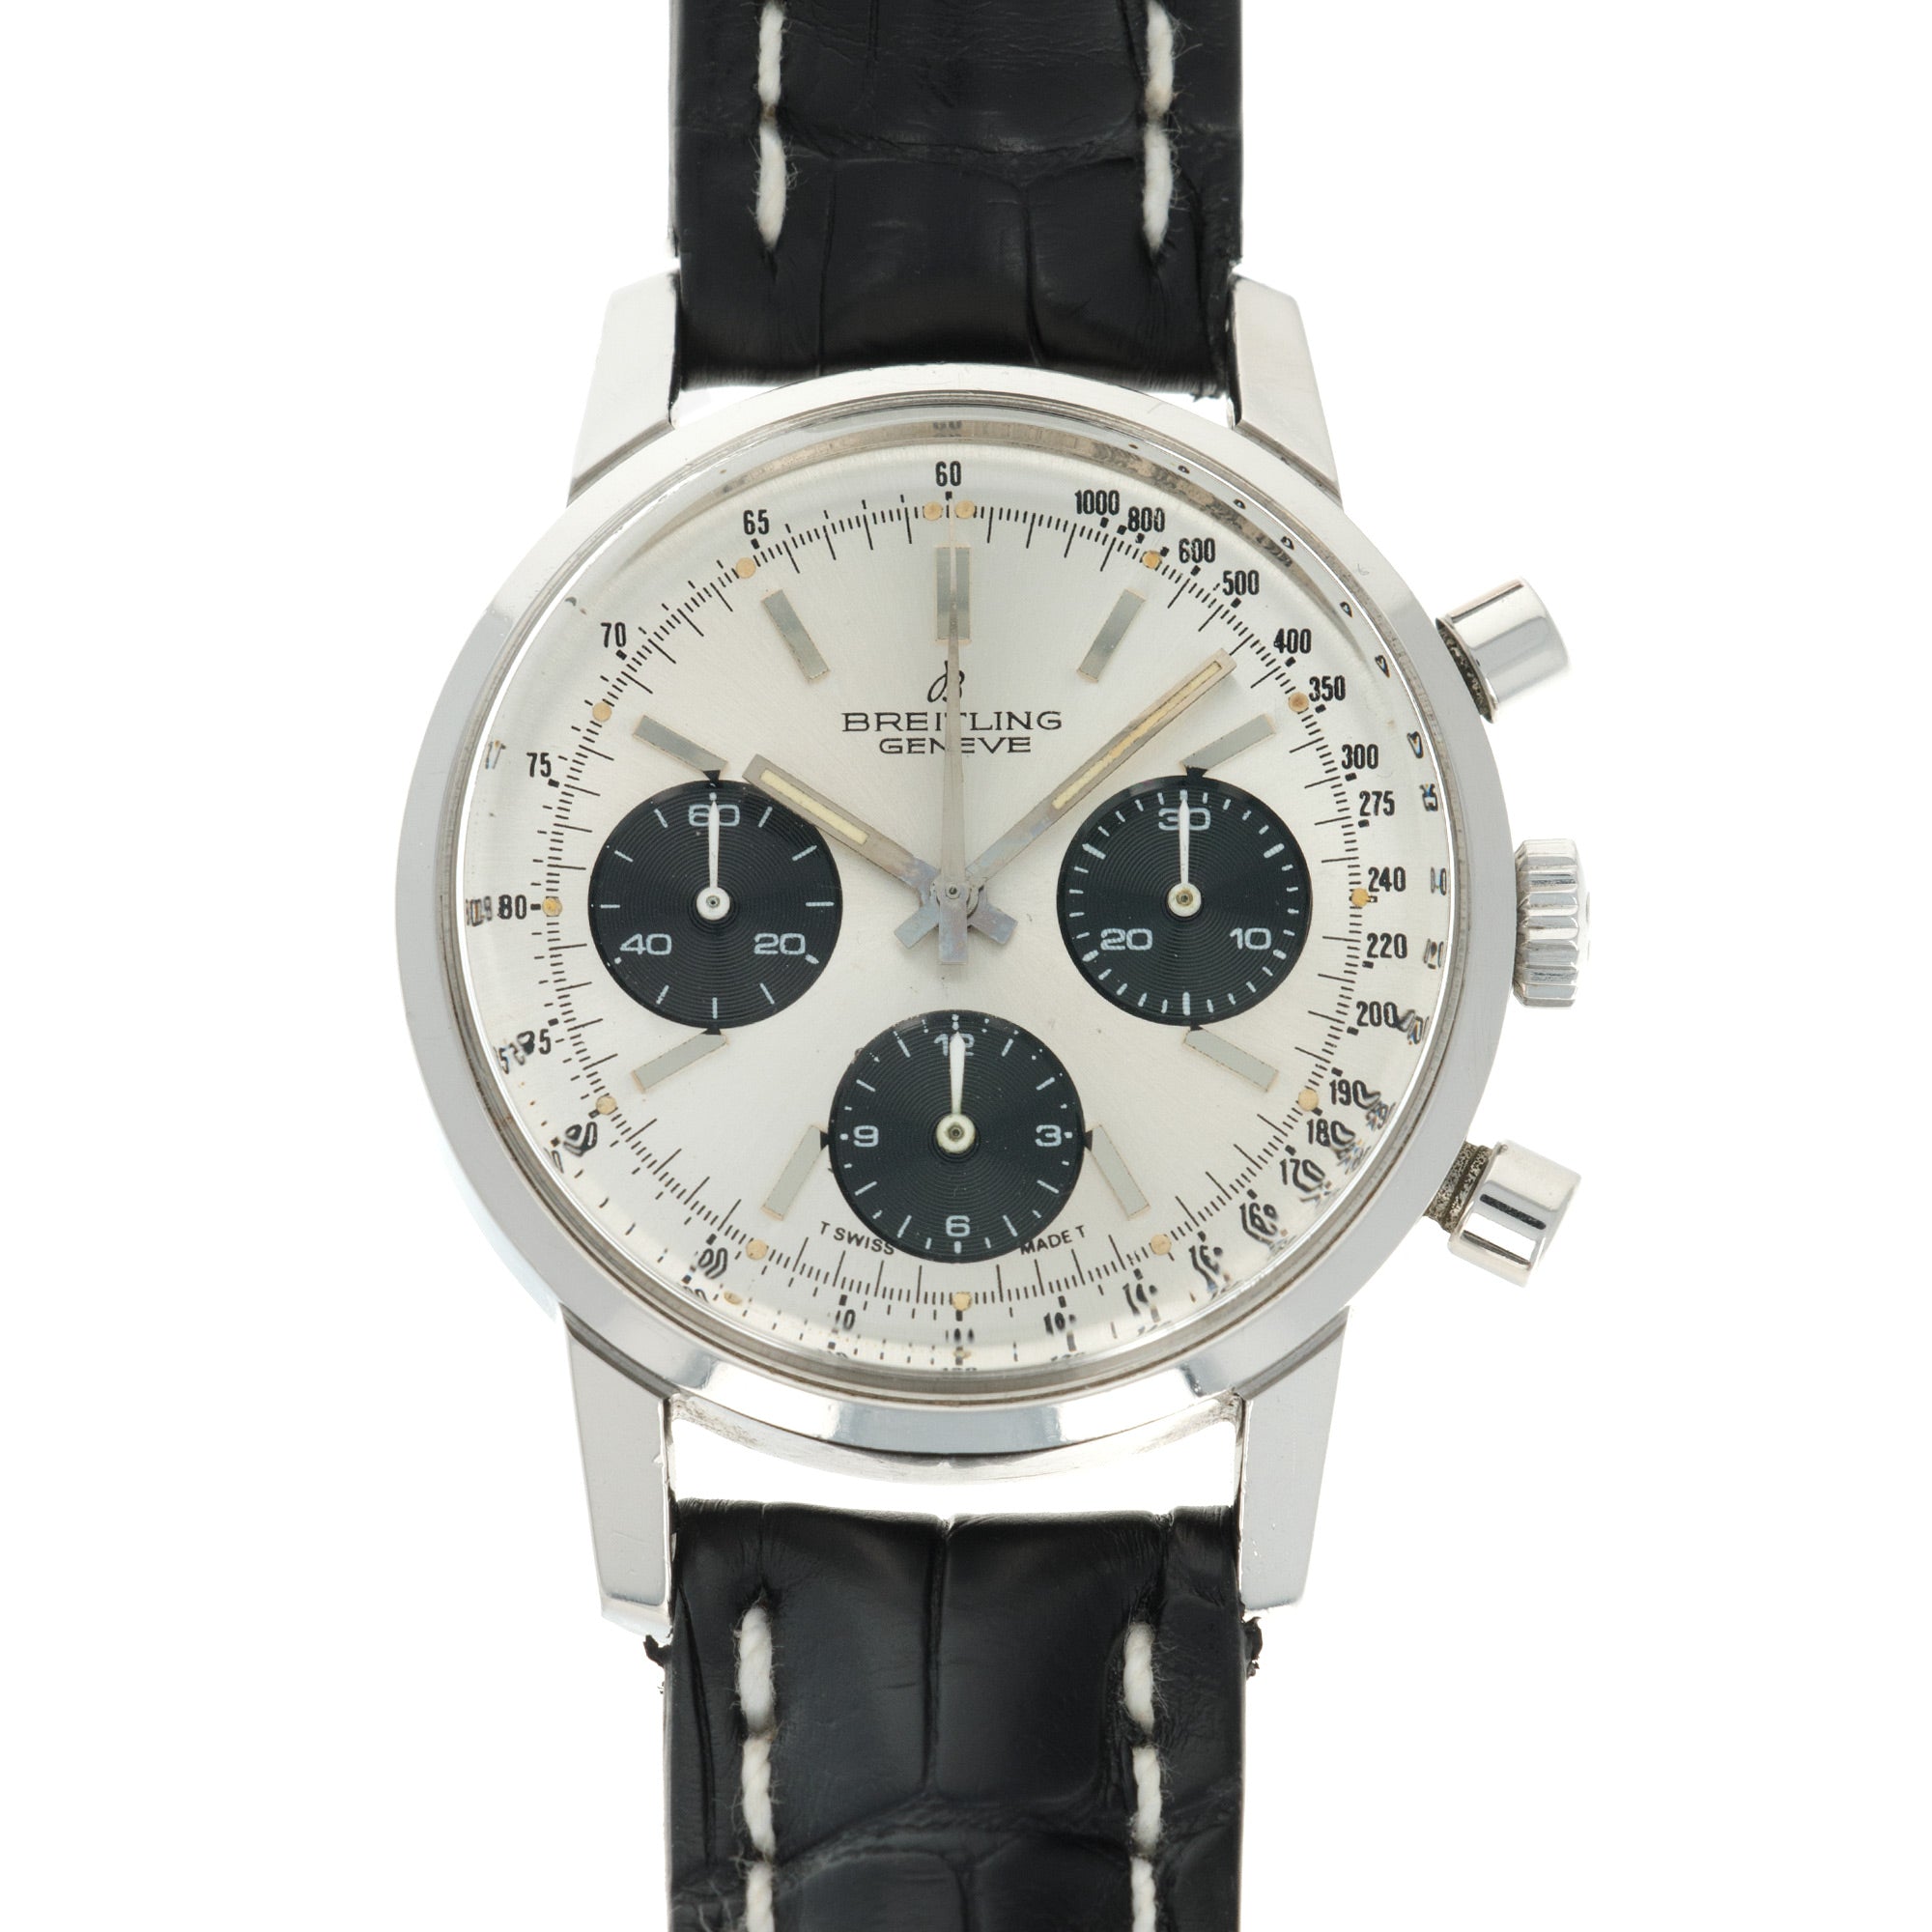 Breitling - Breitling Steel Chronograph Ref. 815, also Known as the Long Playing Chronograph - The Keystone Watches